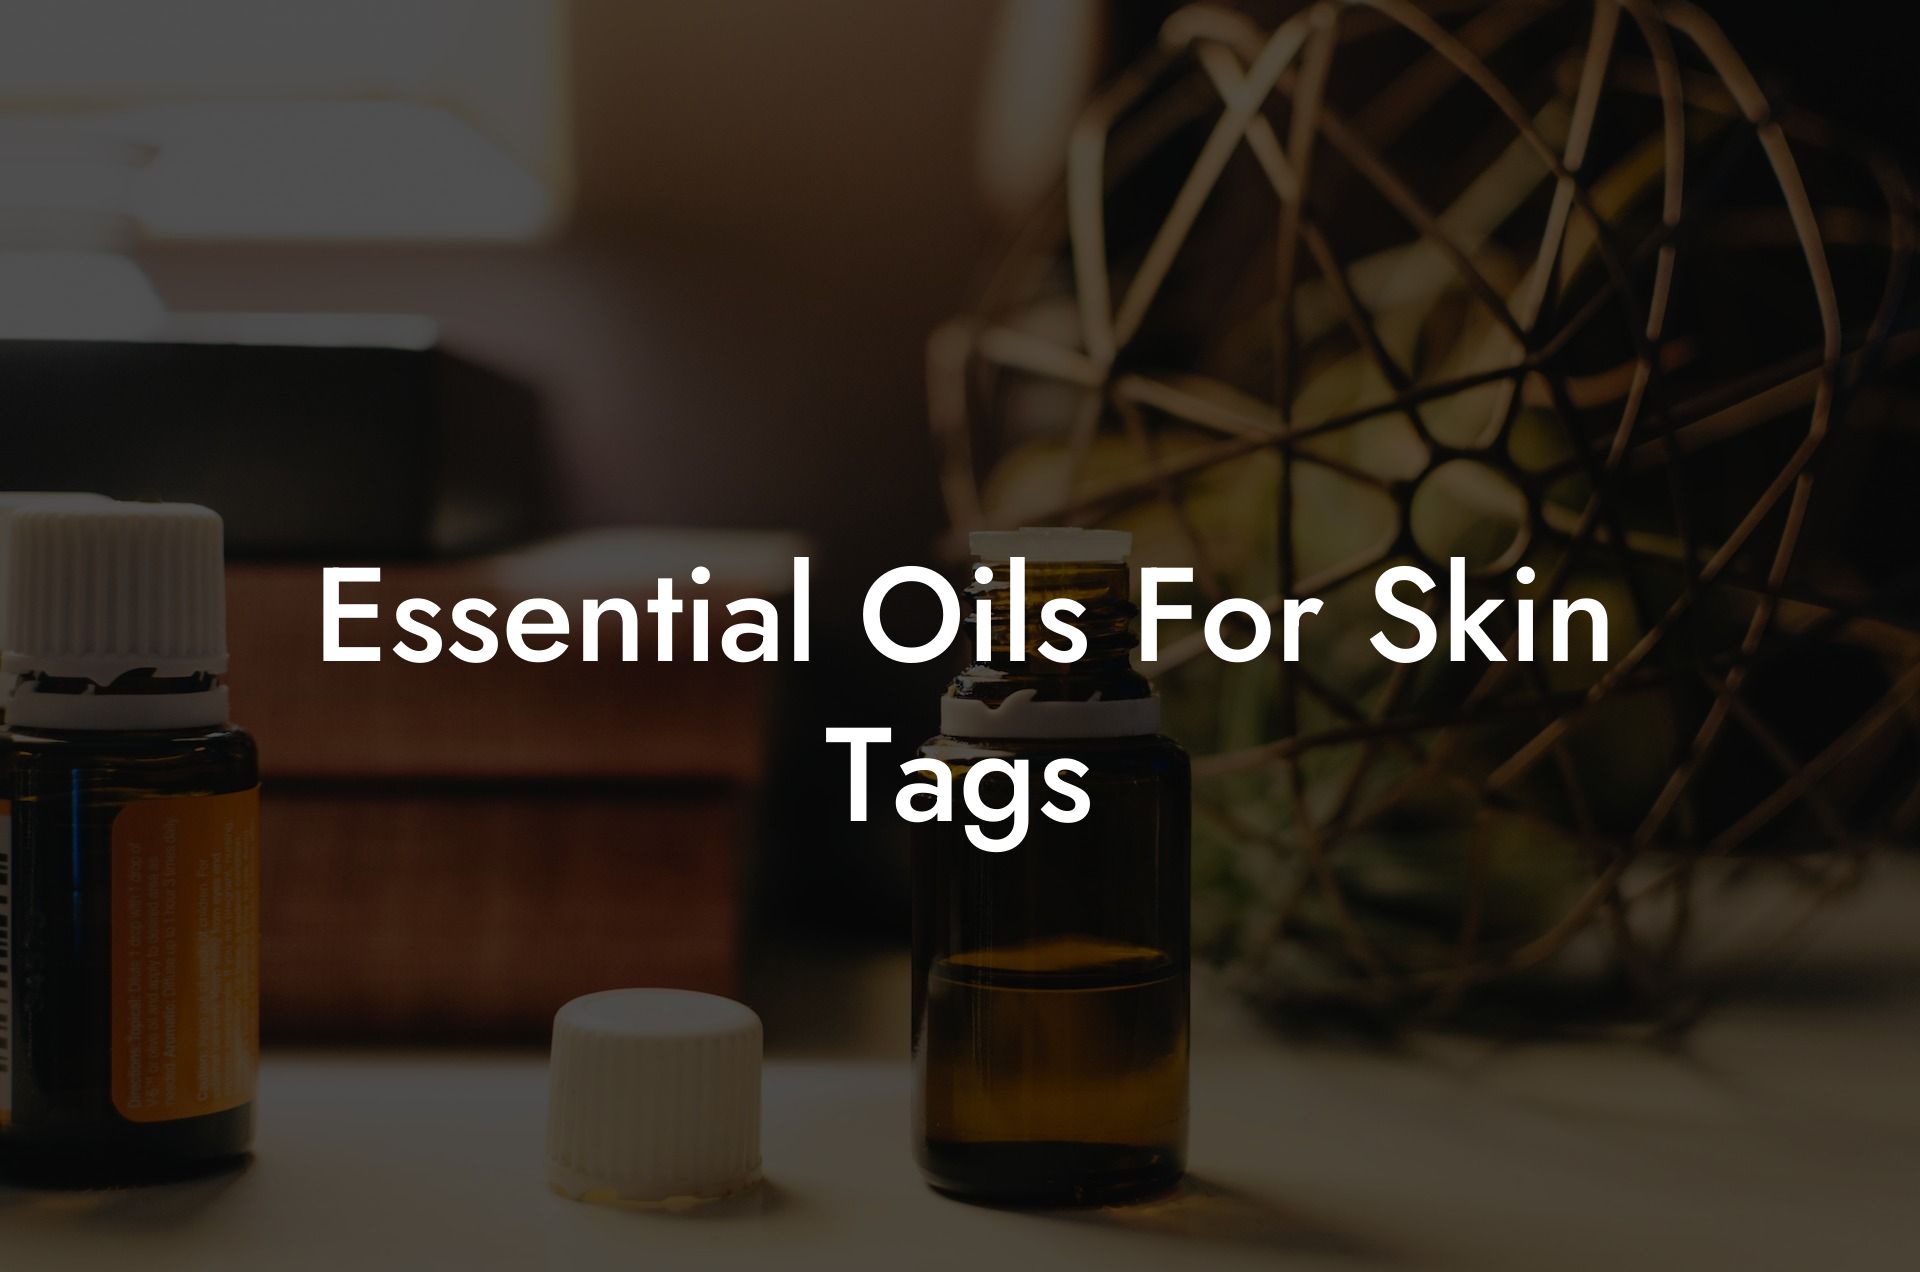 Essential Oils For Skin Tags